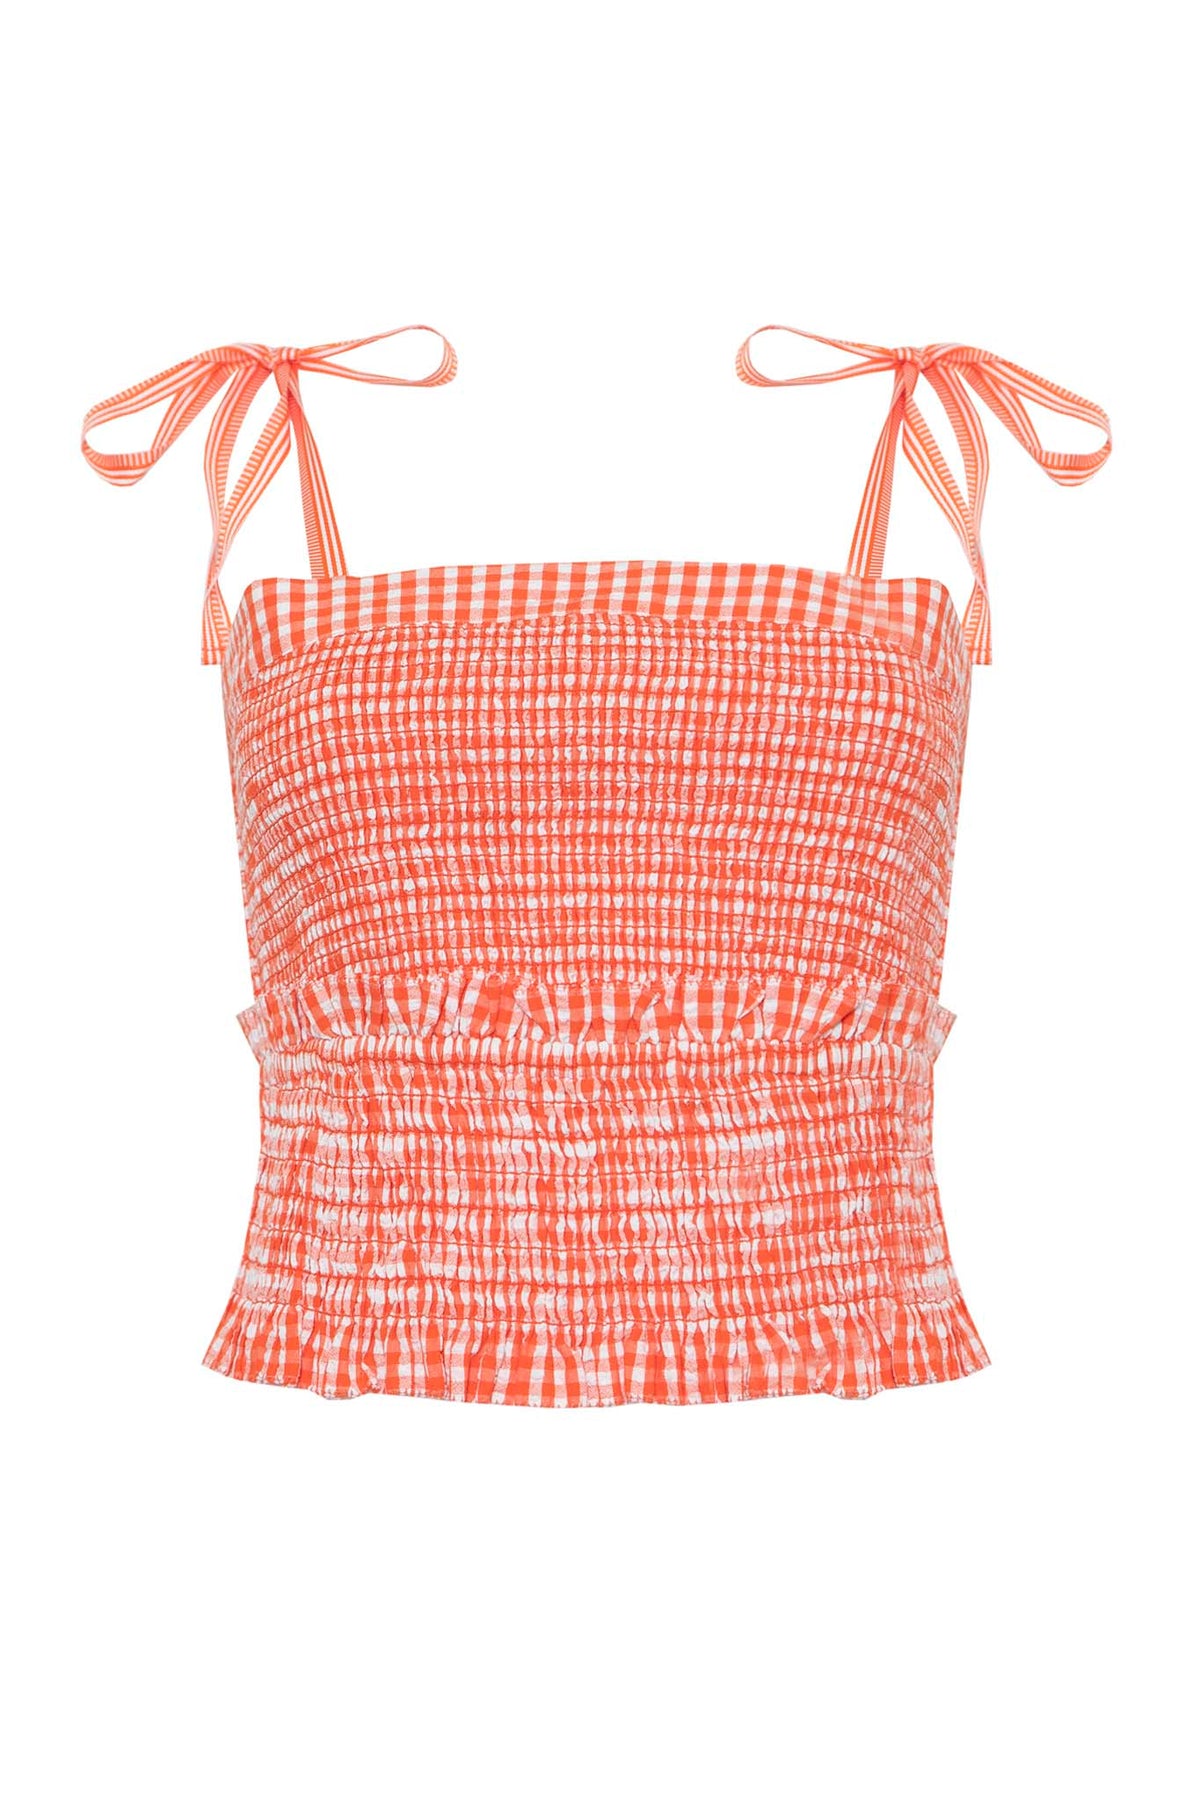 A square neck smocked top with tie shoulder straps in seersucker gingham with a ruffle hem.